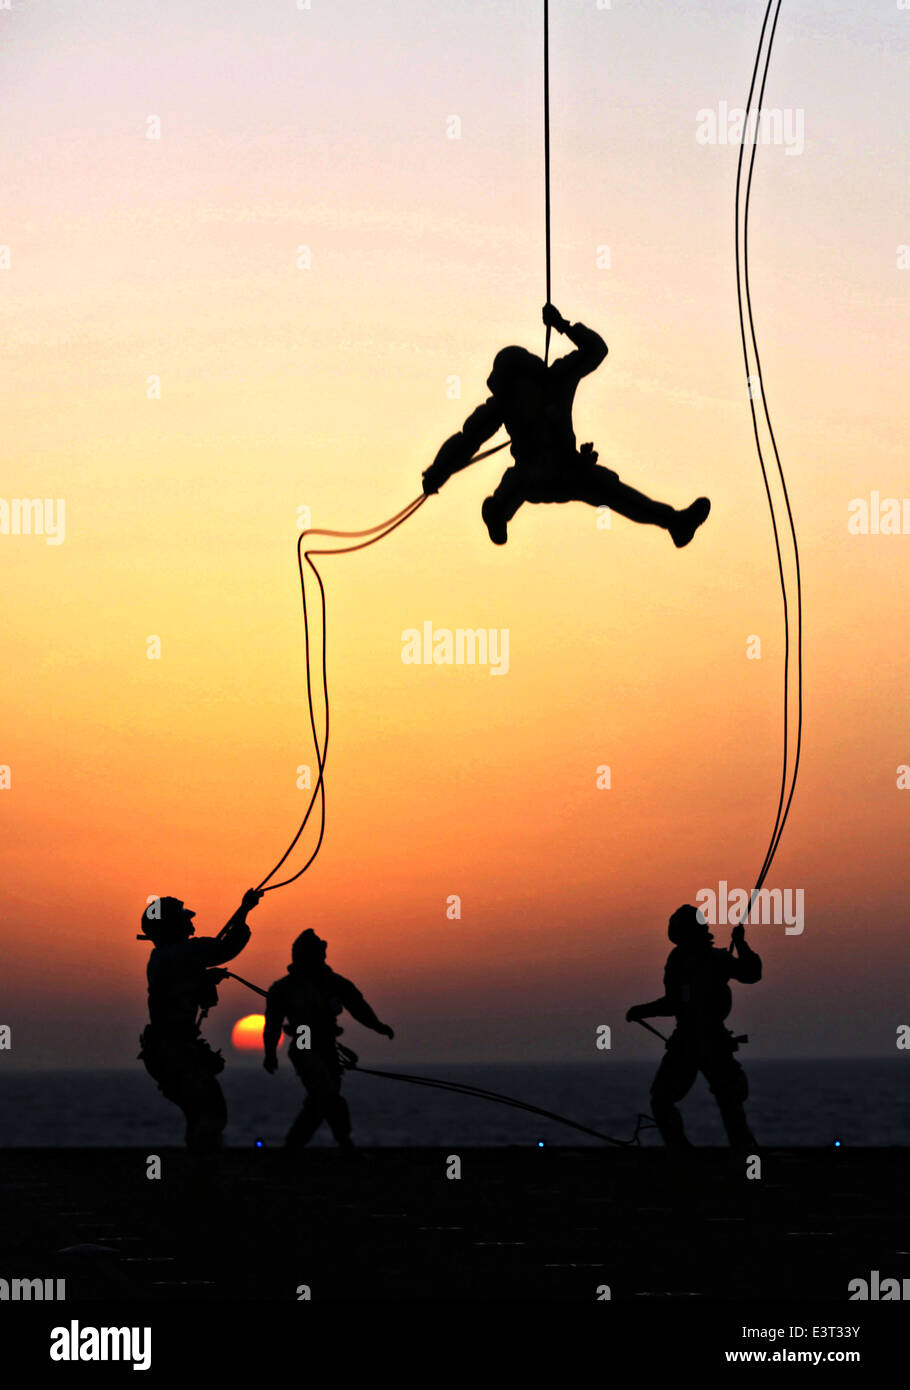 US Marines with Battalion Landing Team, 22nd Marine Expeditionary Unit, rappel out of a CH-53E Super Stallion helicopter at sunset during a fast rope and rappel training exercise aboard the USS Bataan June 24, 2014. Stock Photo